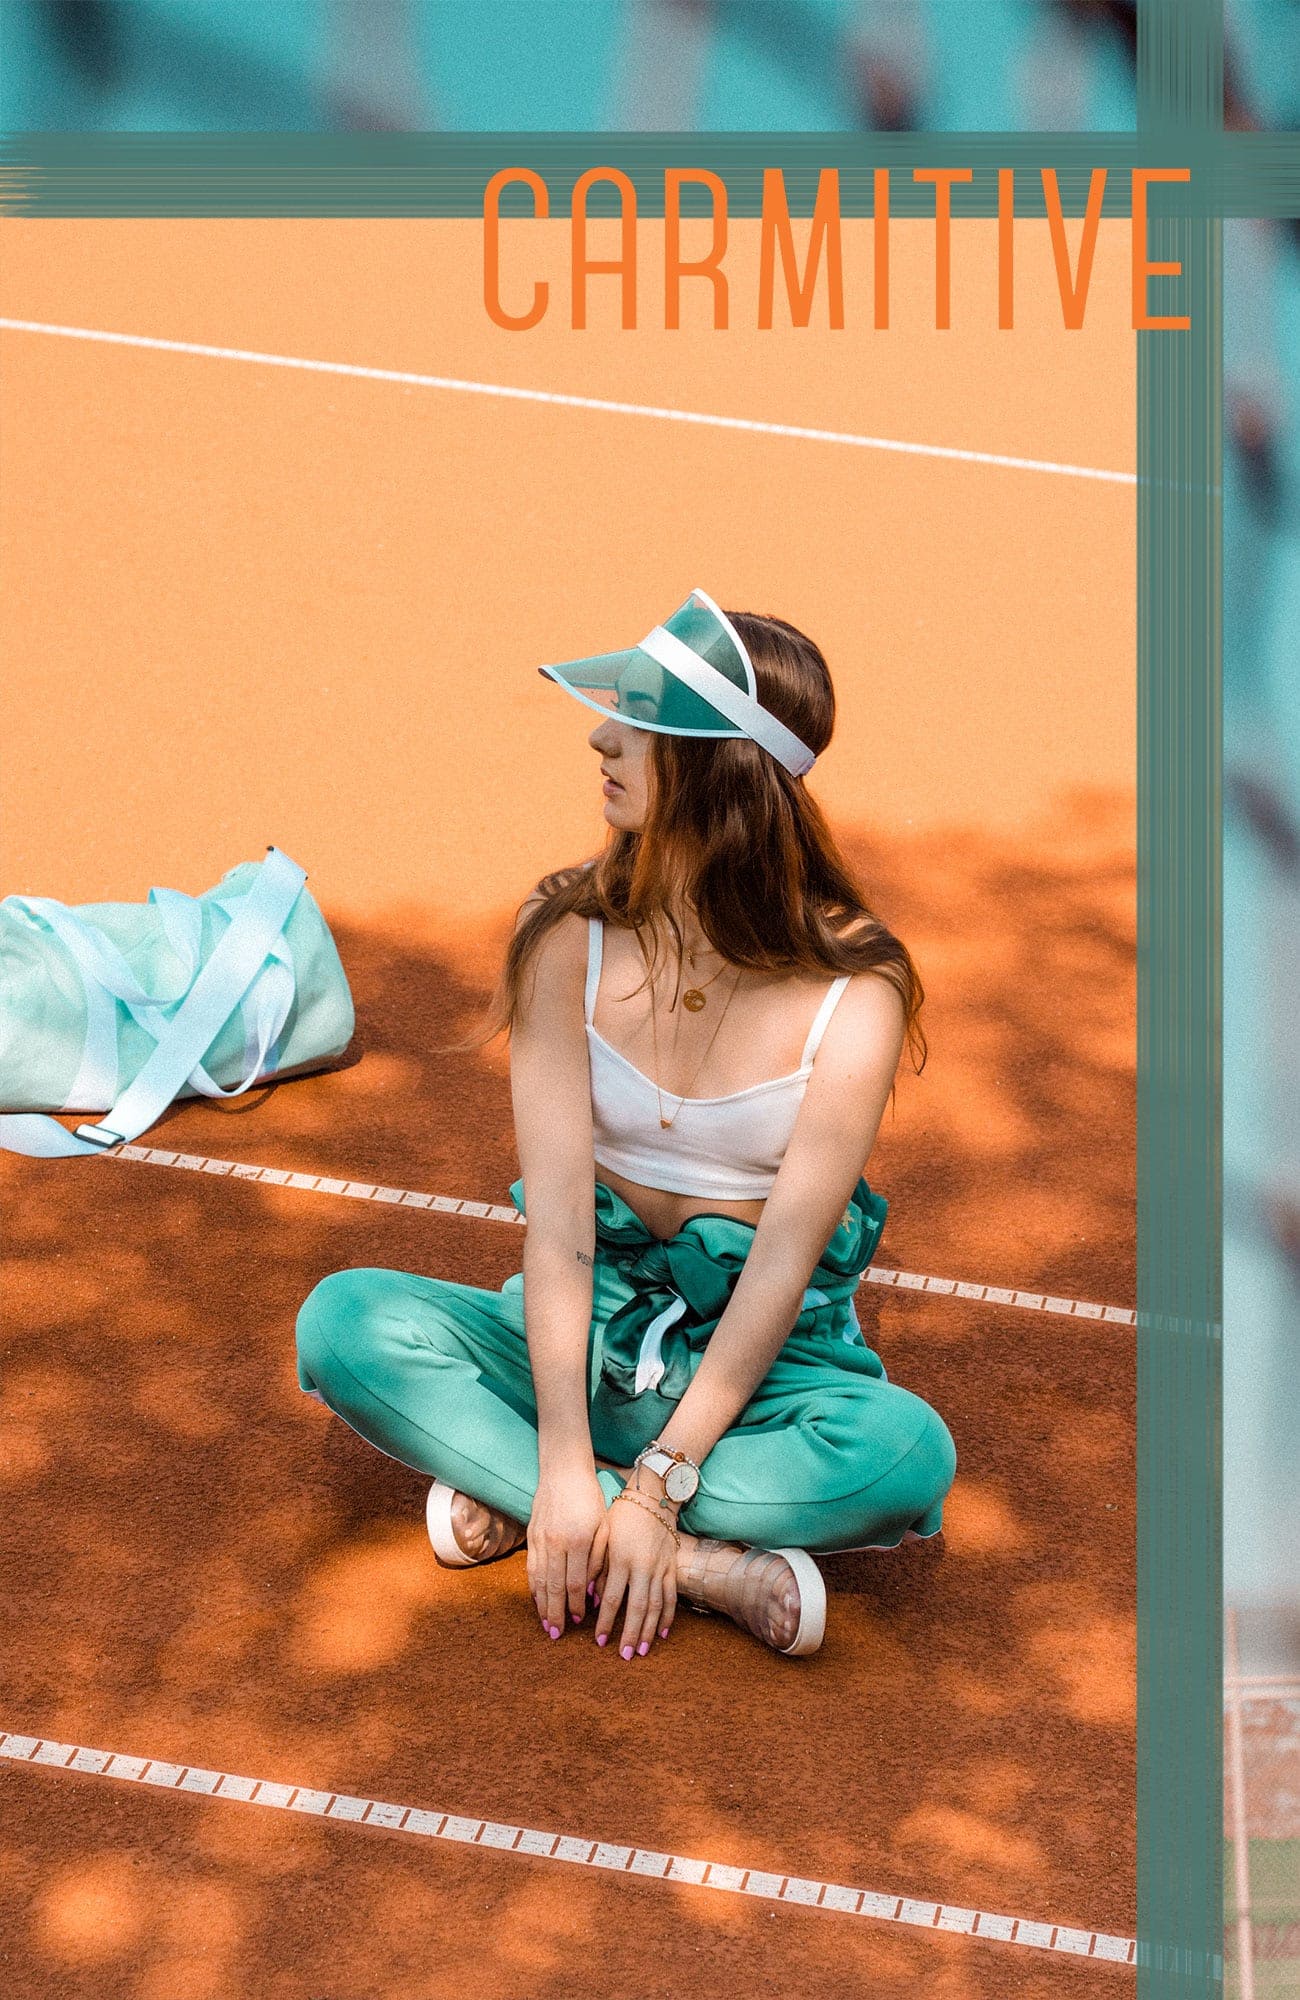 Fashion, Fashionblog, Fashion Magazine, Editorial, Style, Style Guide, Style Inspiration, Streetwear, Street Style, Swiss, Switzerland, Outift, OOTD, Outfit Inspiration, Inspo, Girly, Onepiece, Onesie, Overall, Tennis, Tennis Court, Sports, Athleisure, Mint, Green, Tracksuit, Power Dressing